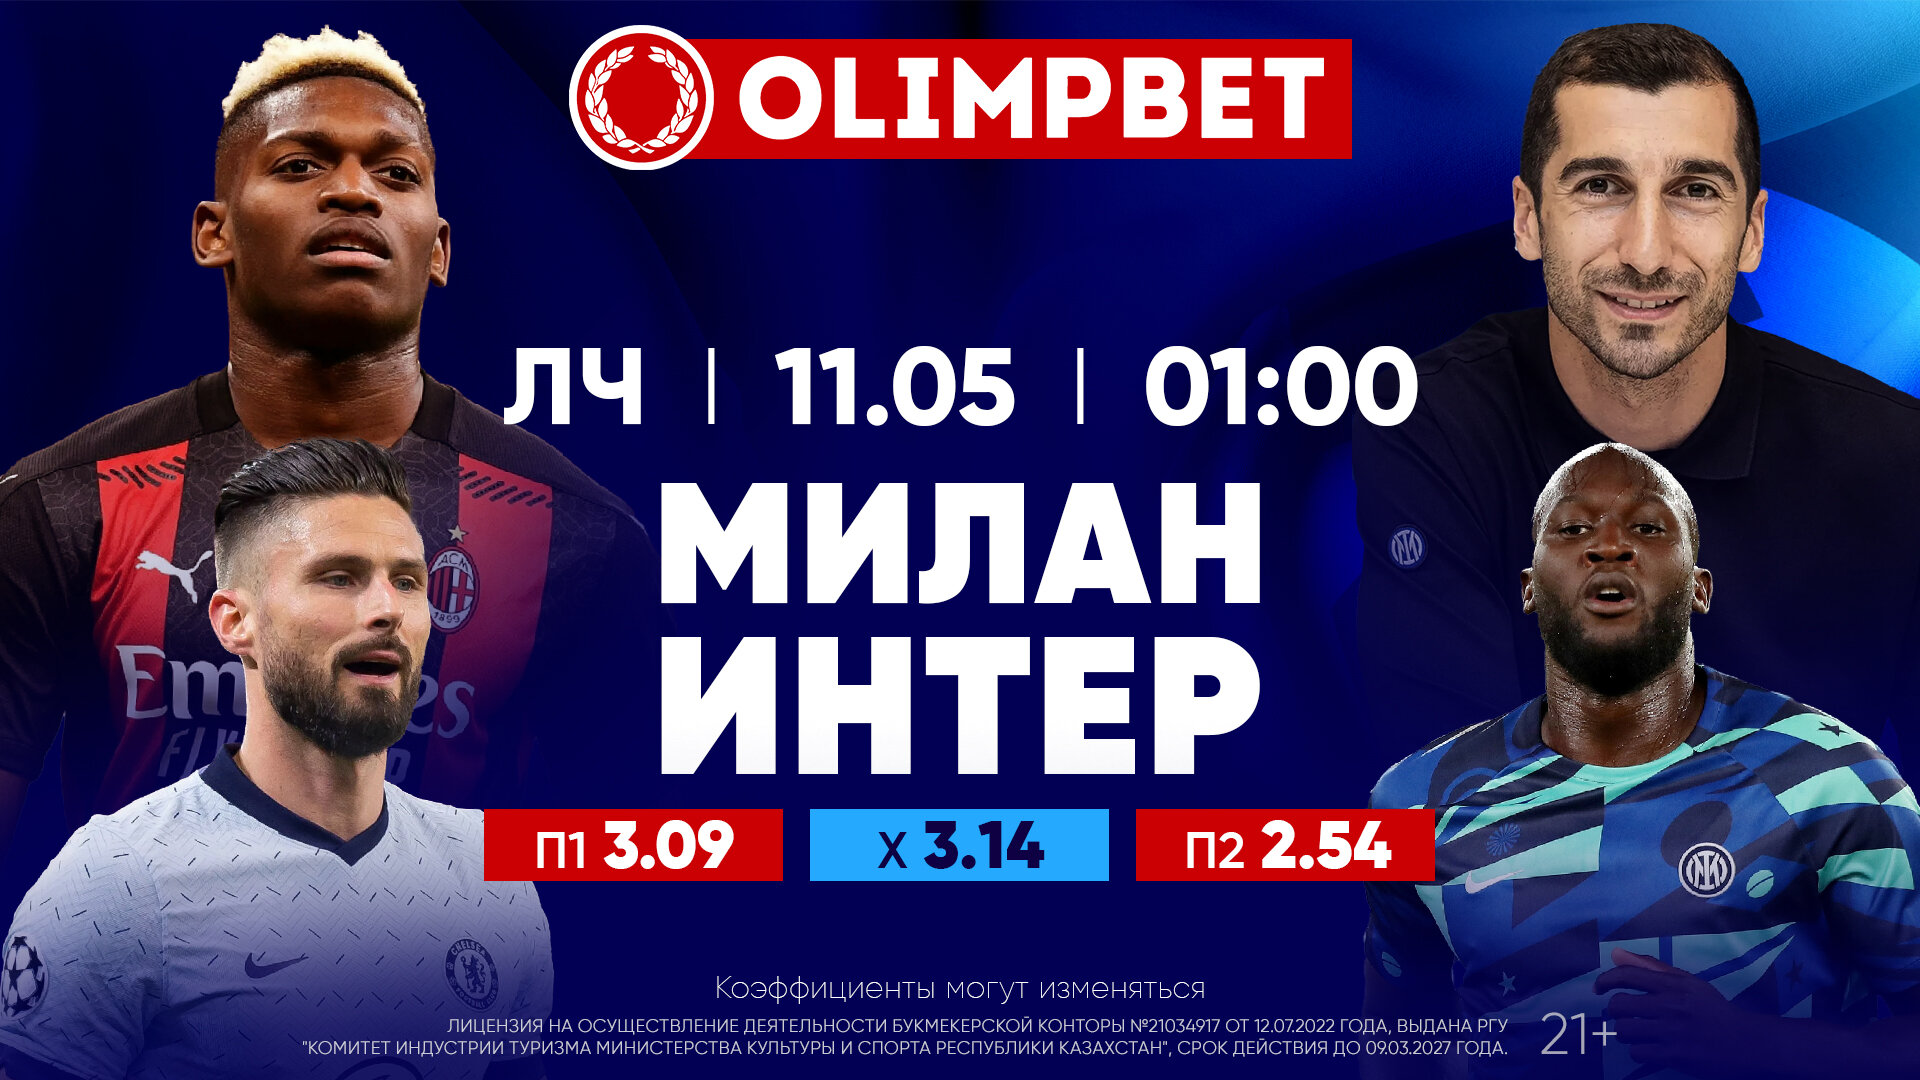 https://olimpbet.kz/index.php?page=line&addons=1&action=2&mid=78199872